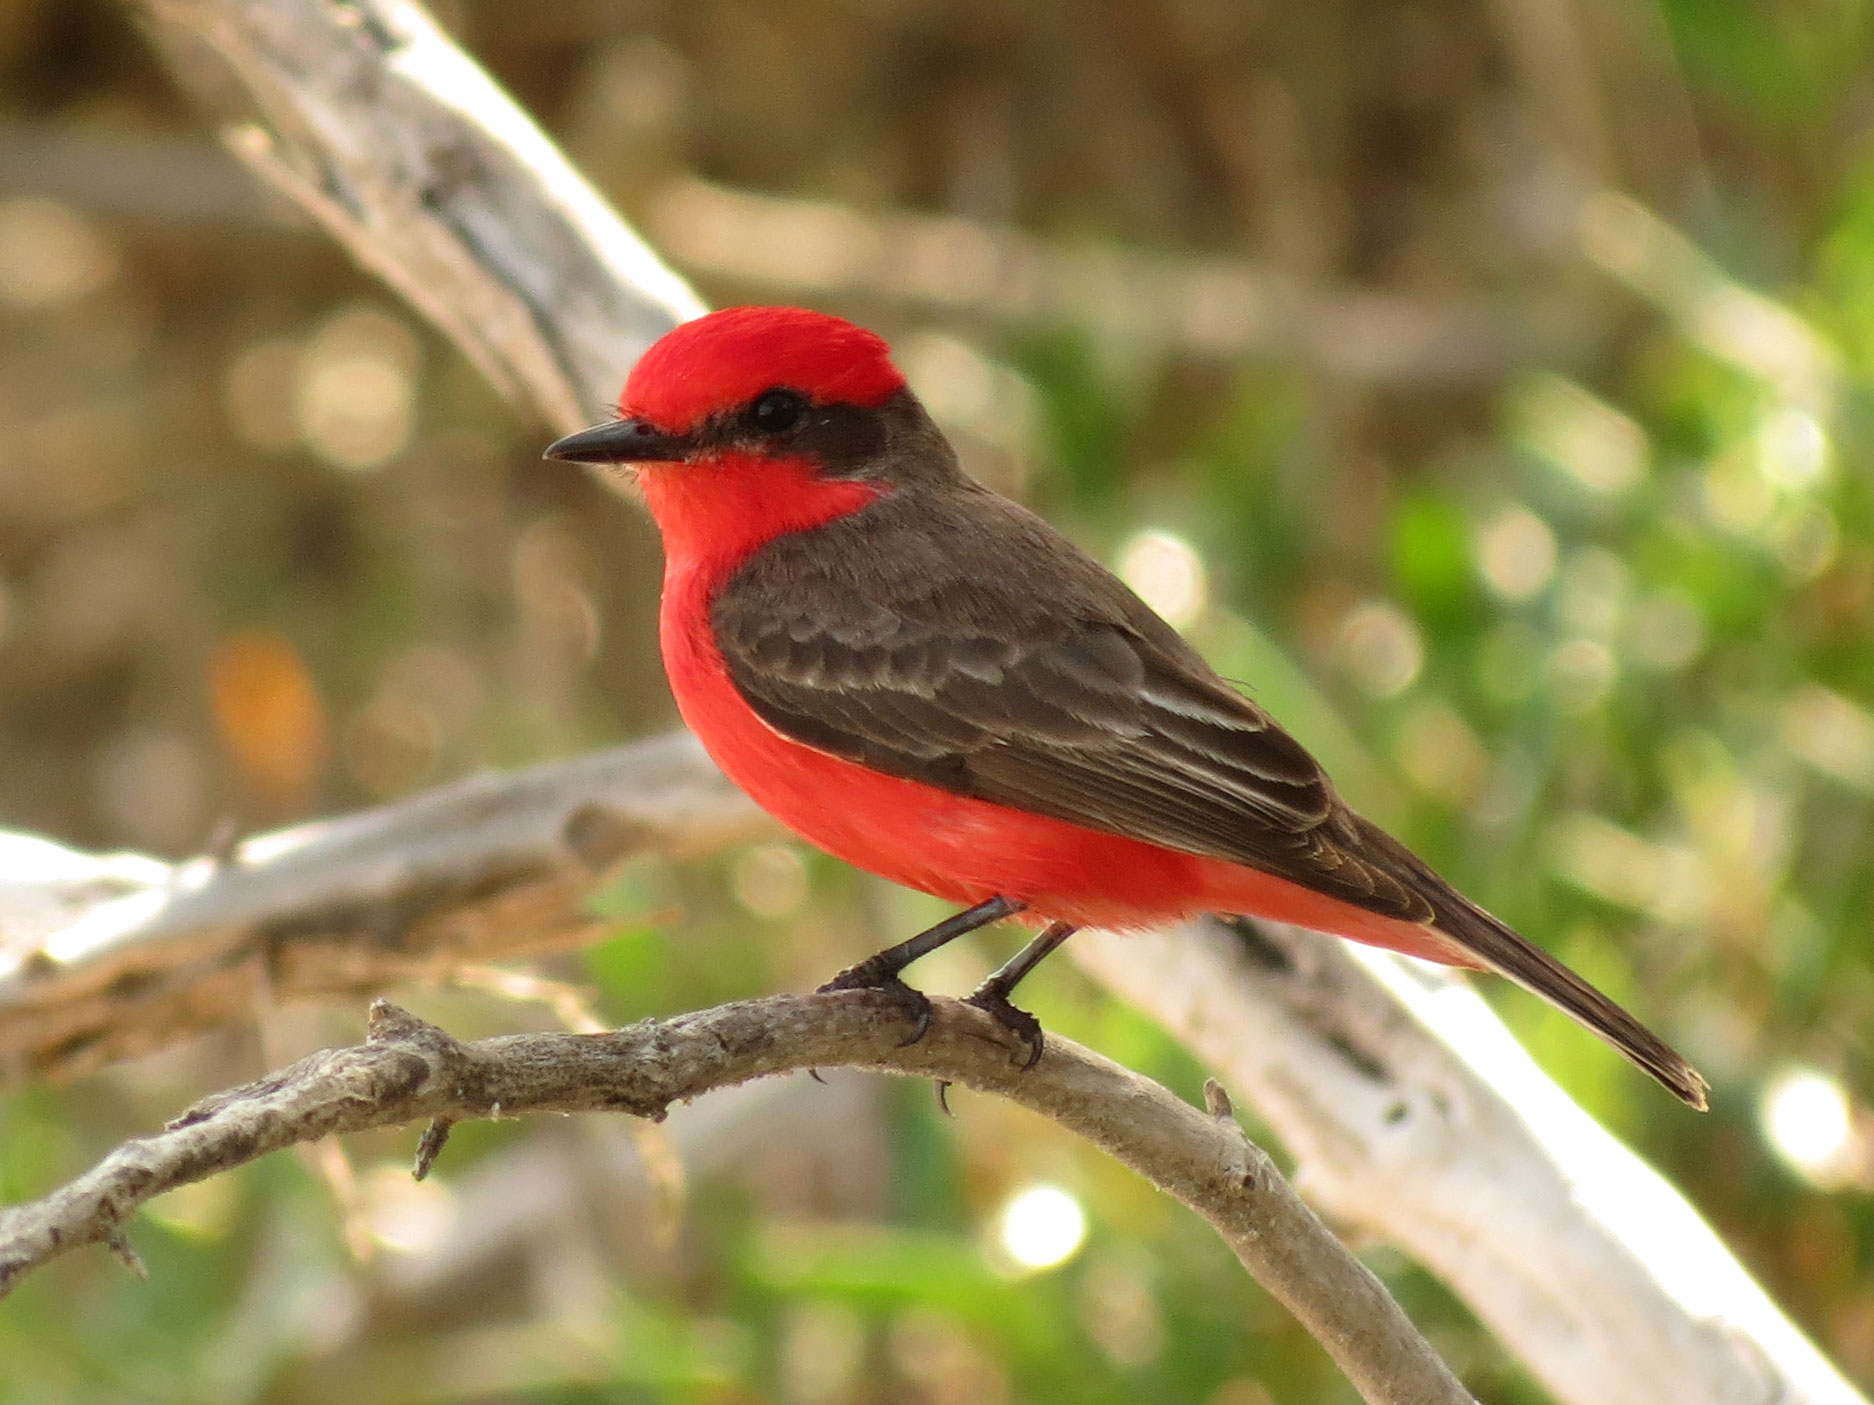 Black Birds with Red Wings - Vermilion flycatcher